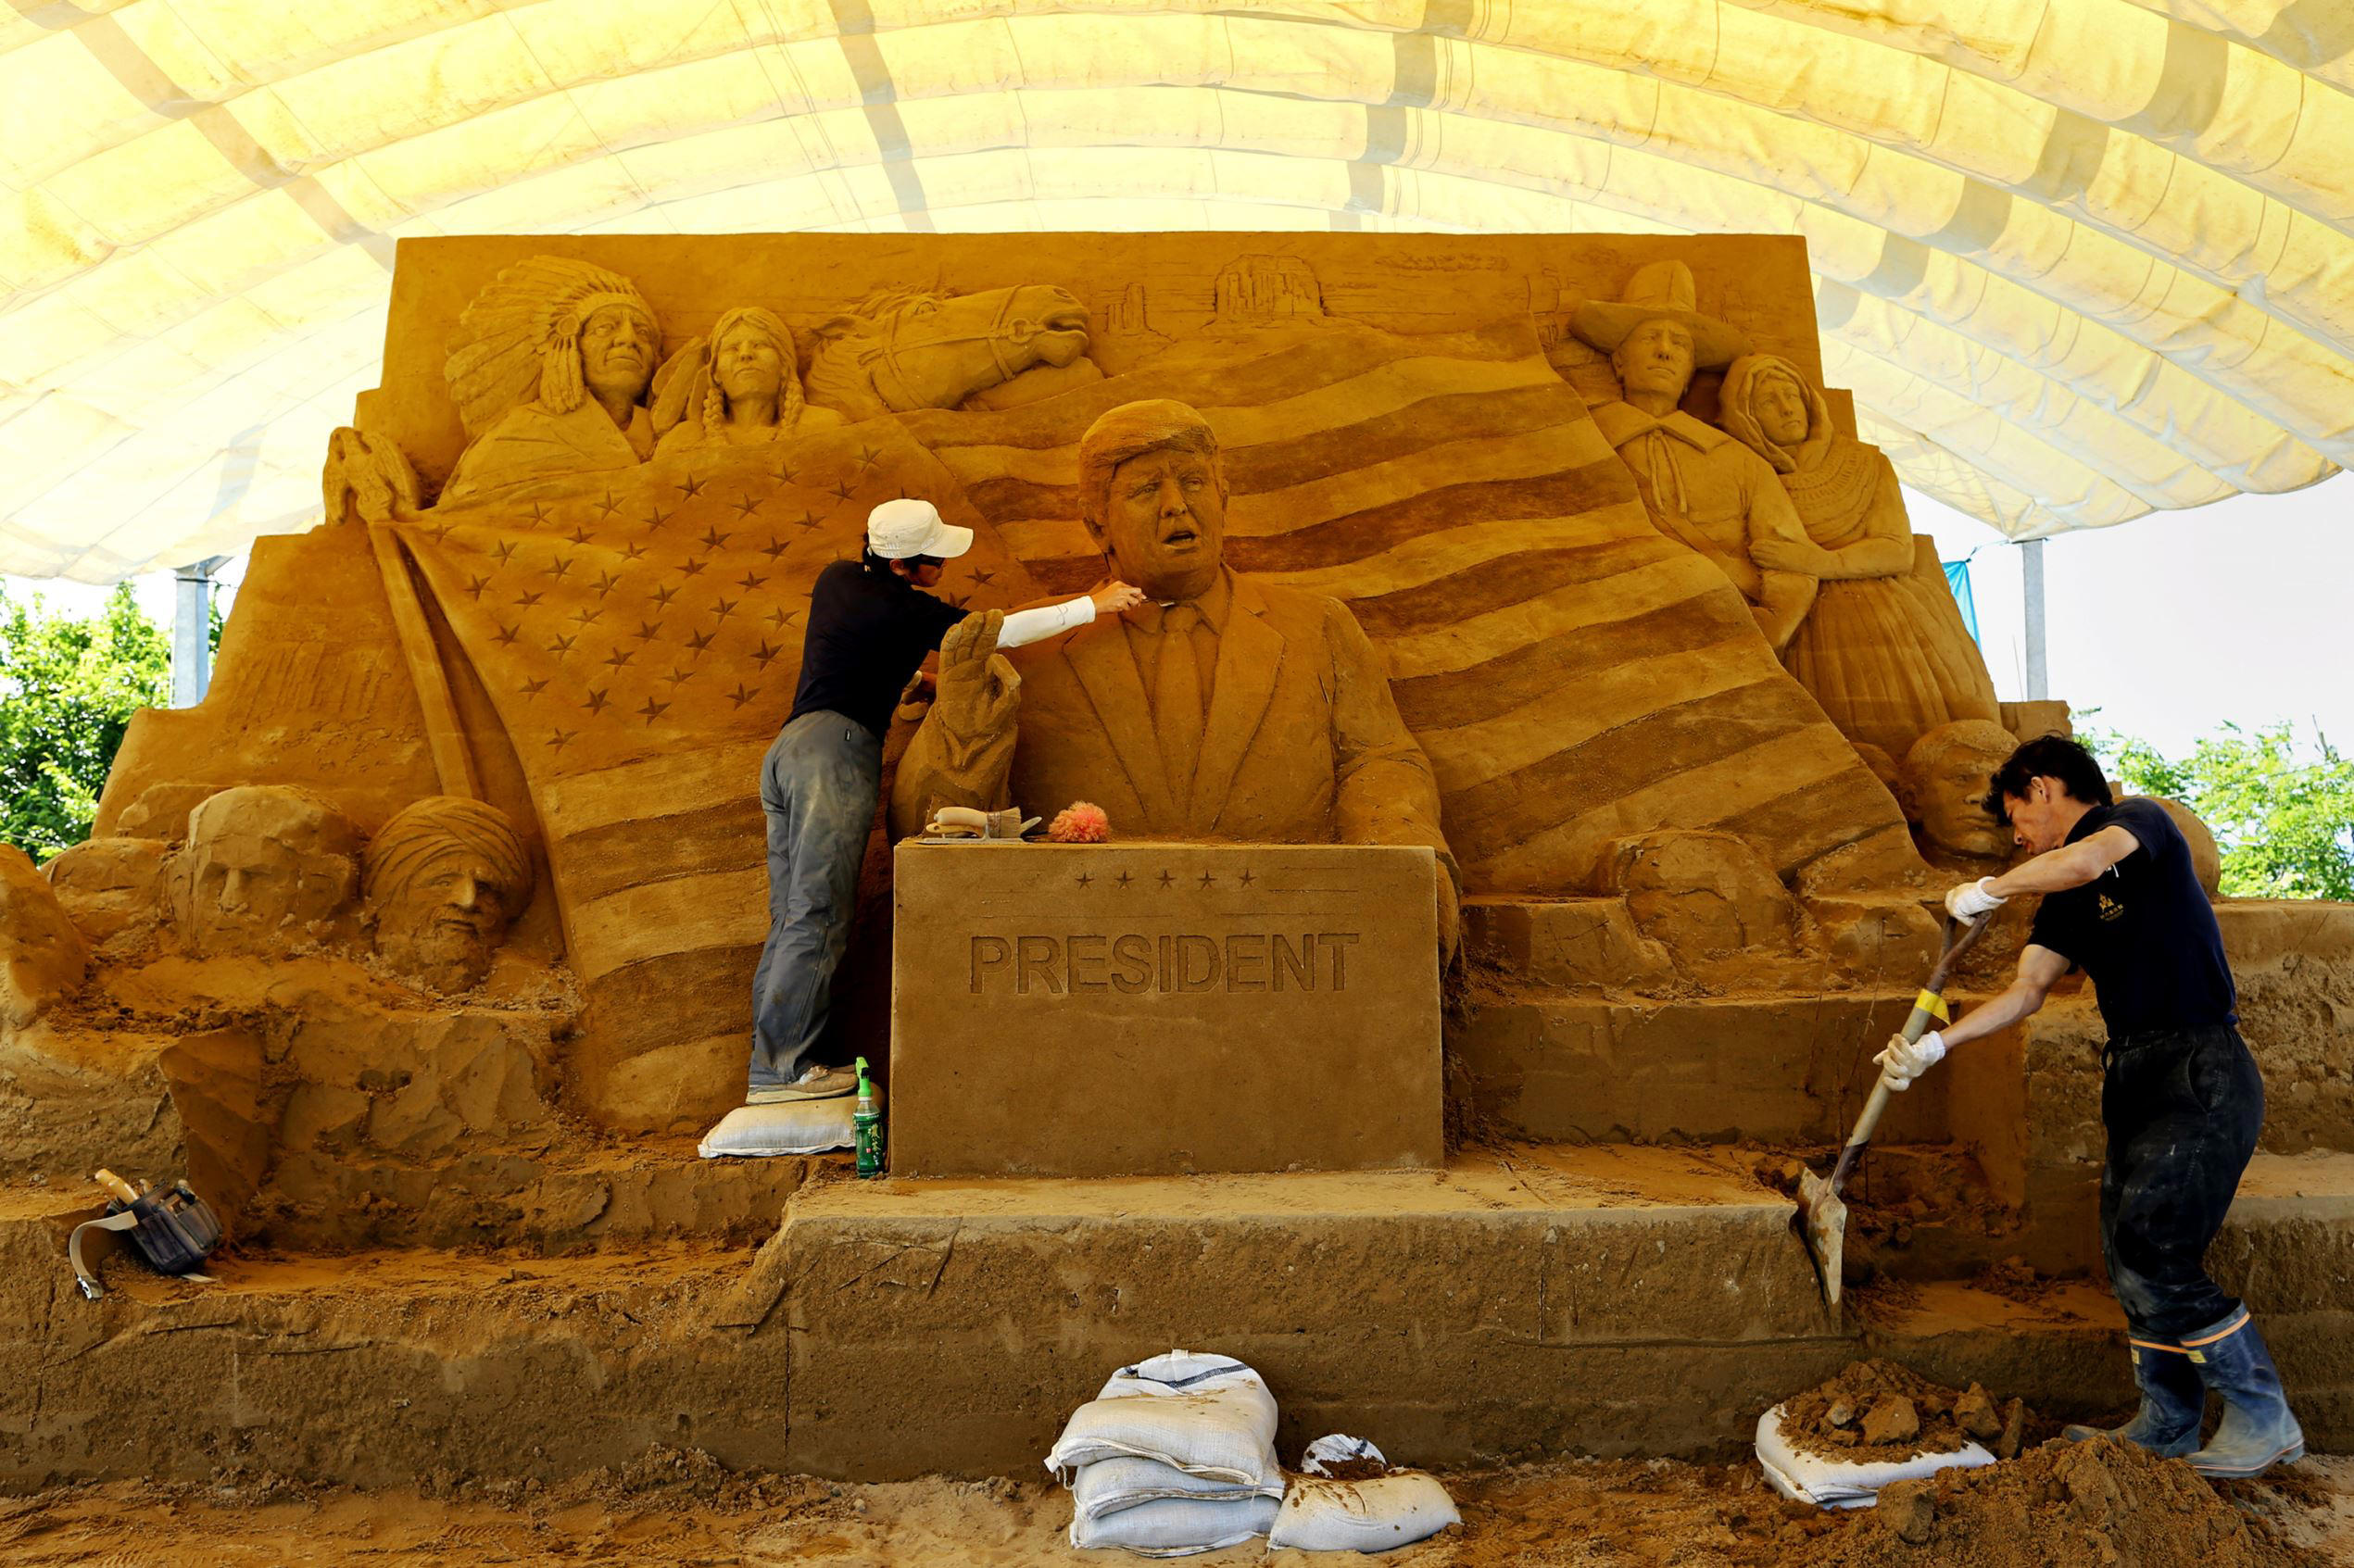 Slide 1 of 99: Katsuhiko Chaen(L), a sand sculptor and executive director of the Sand Museum works on a sculpture of US President Donald Trump during the 10th Annual Sand Sculpture Exhibition of 'Travel Around the World in Sand - The United States of America' at the Sand Museum in the Tottori Dune on June 11, 2017, in Tottori, Japan.  The exhibition will be on view until January 3, 2018.  (Photo by Buddhika Weerasinghe/Getty Images)